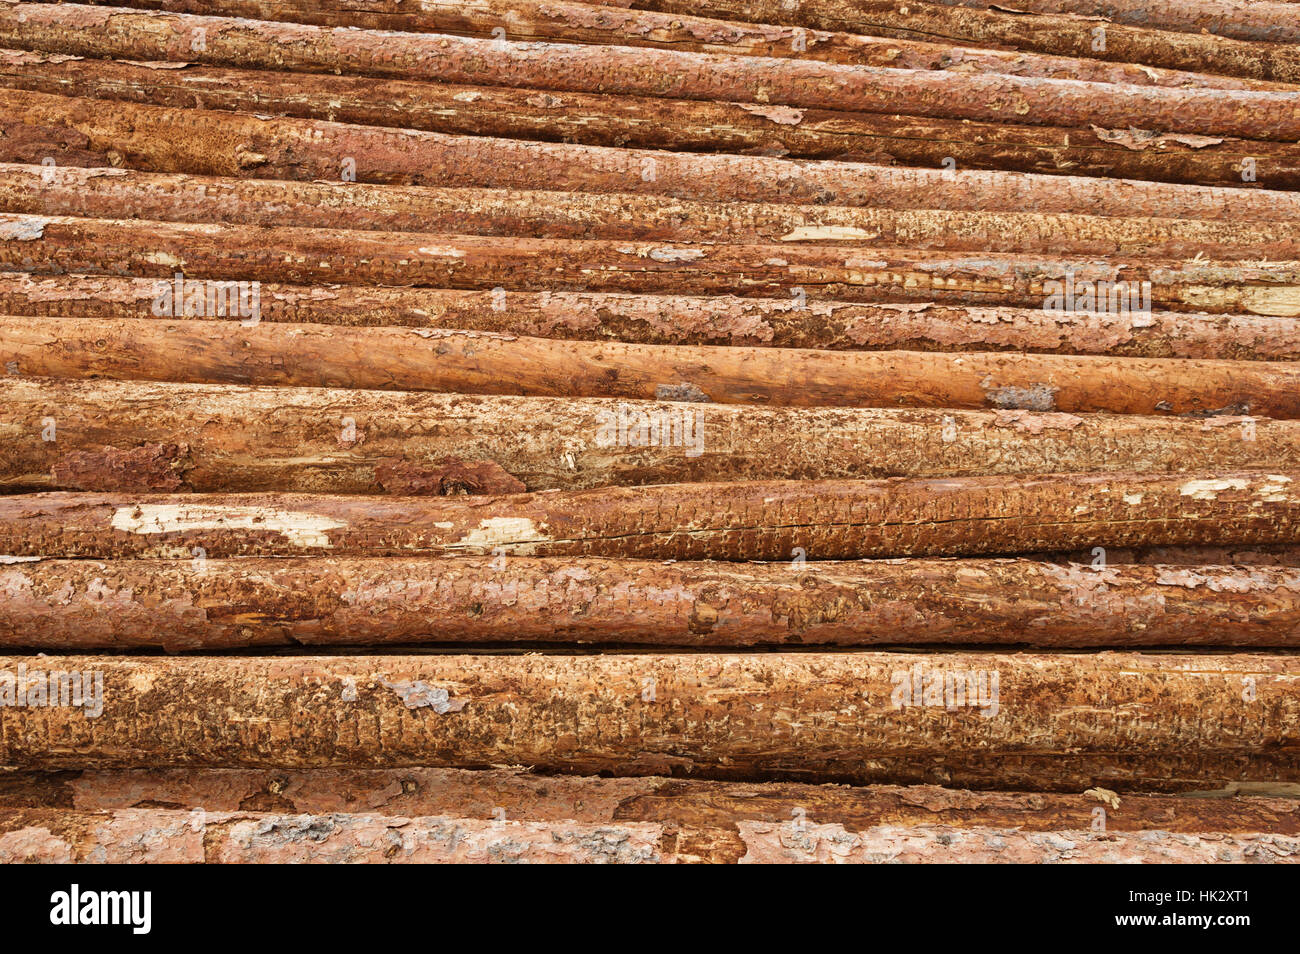 a pile of tree trunk logs as part of a lumber operation Stock Photo